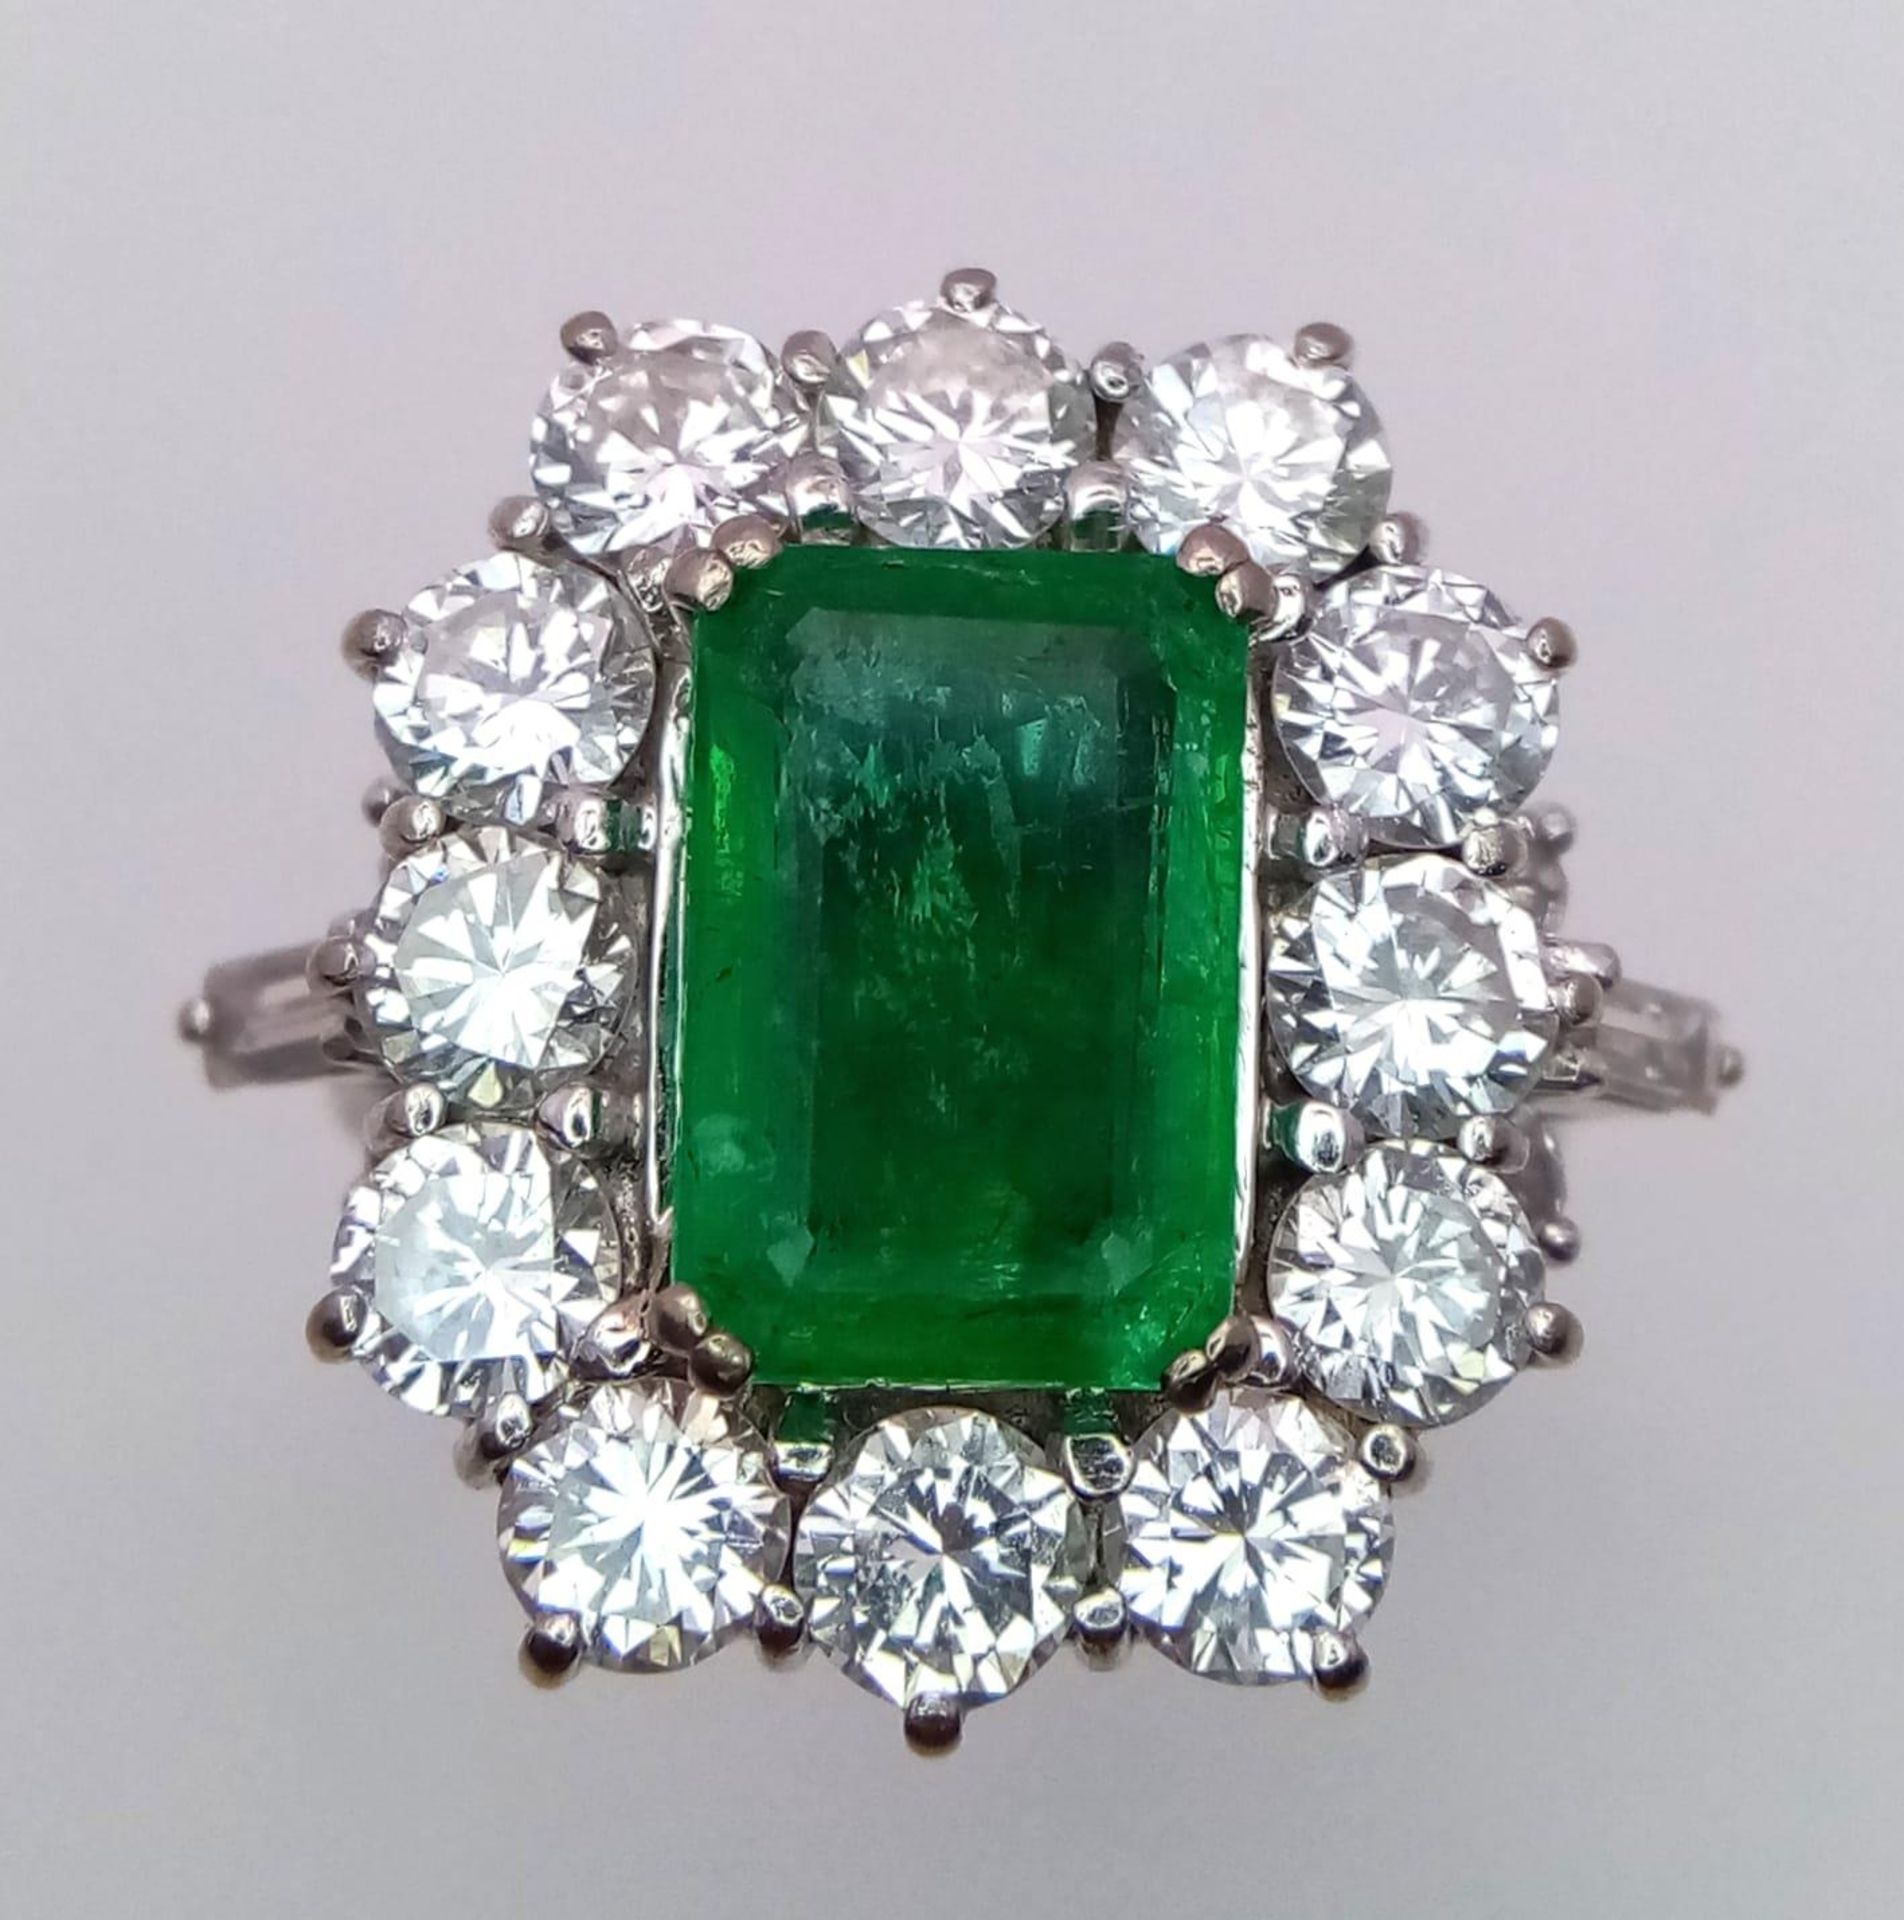 A Head-Turning 18K White Gold, Emerald and Diamond Ladies Dress Ring. Rectangular emerald with a